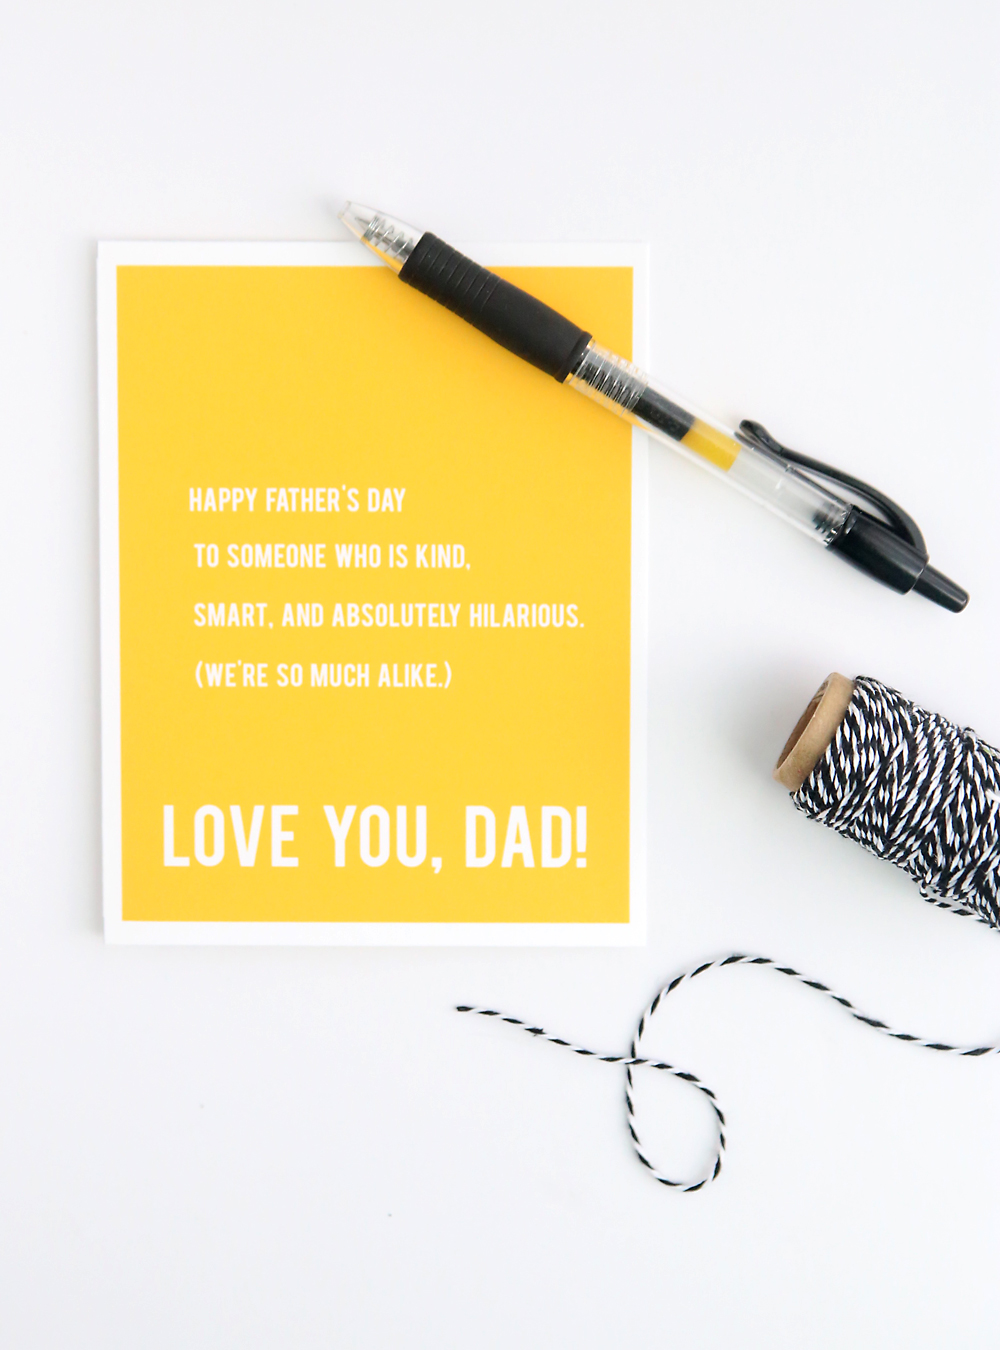 Printable Father\'s Day card that says Happy Father\'s Day to someone who is kind, smart, and absolutely hilarious (we\'re so much alike). Love you, Dad!